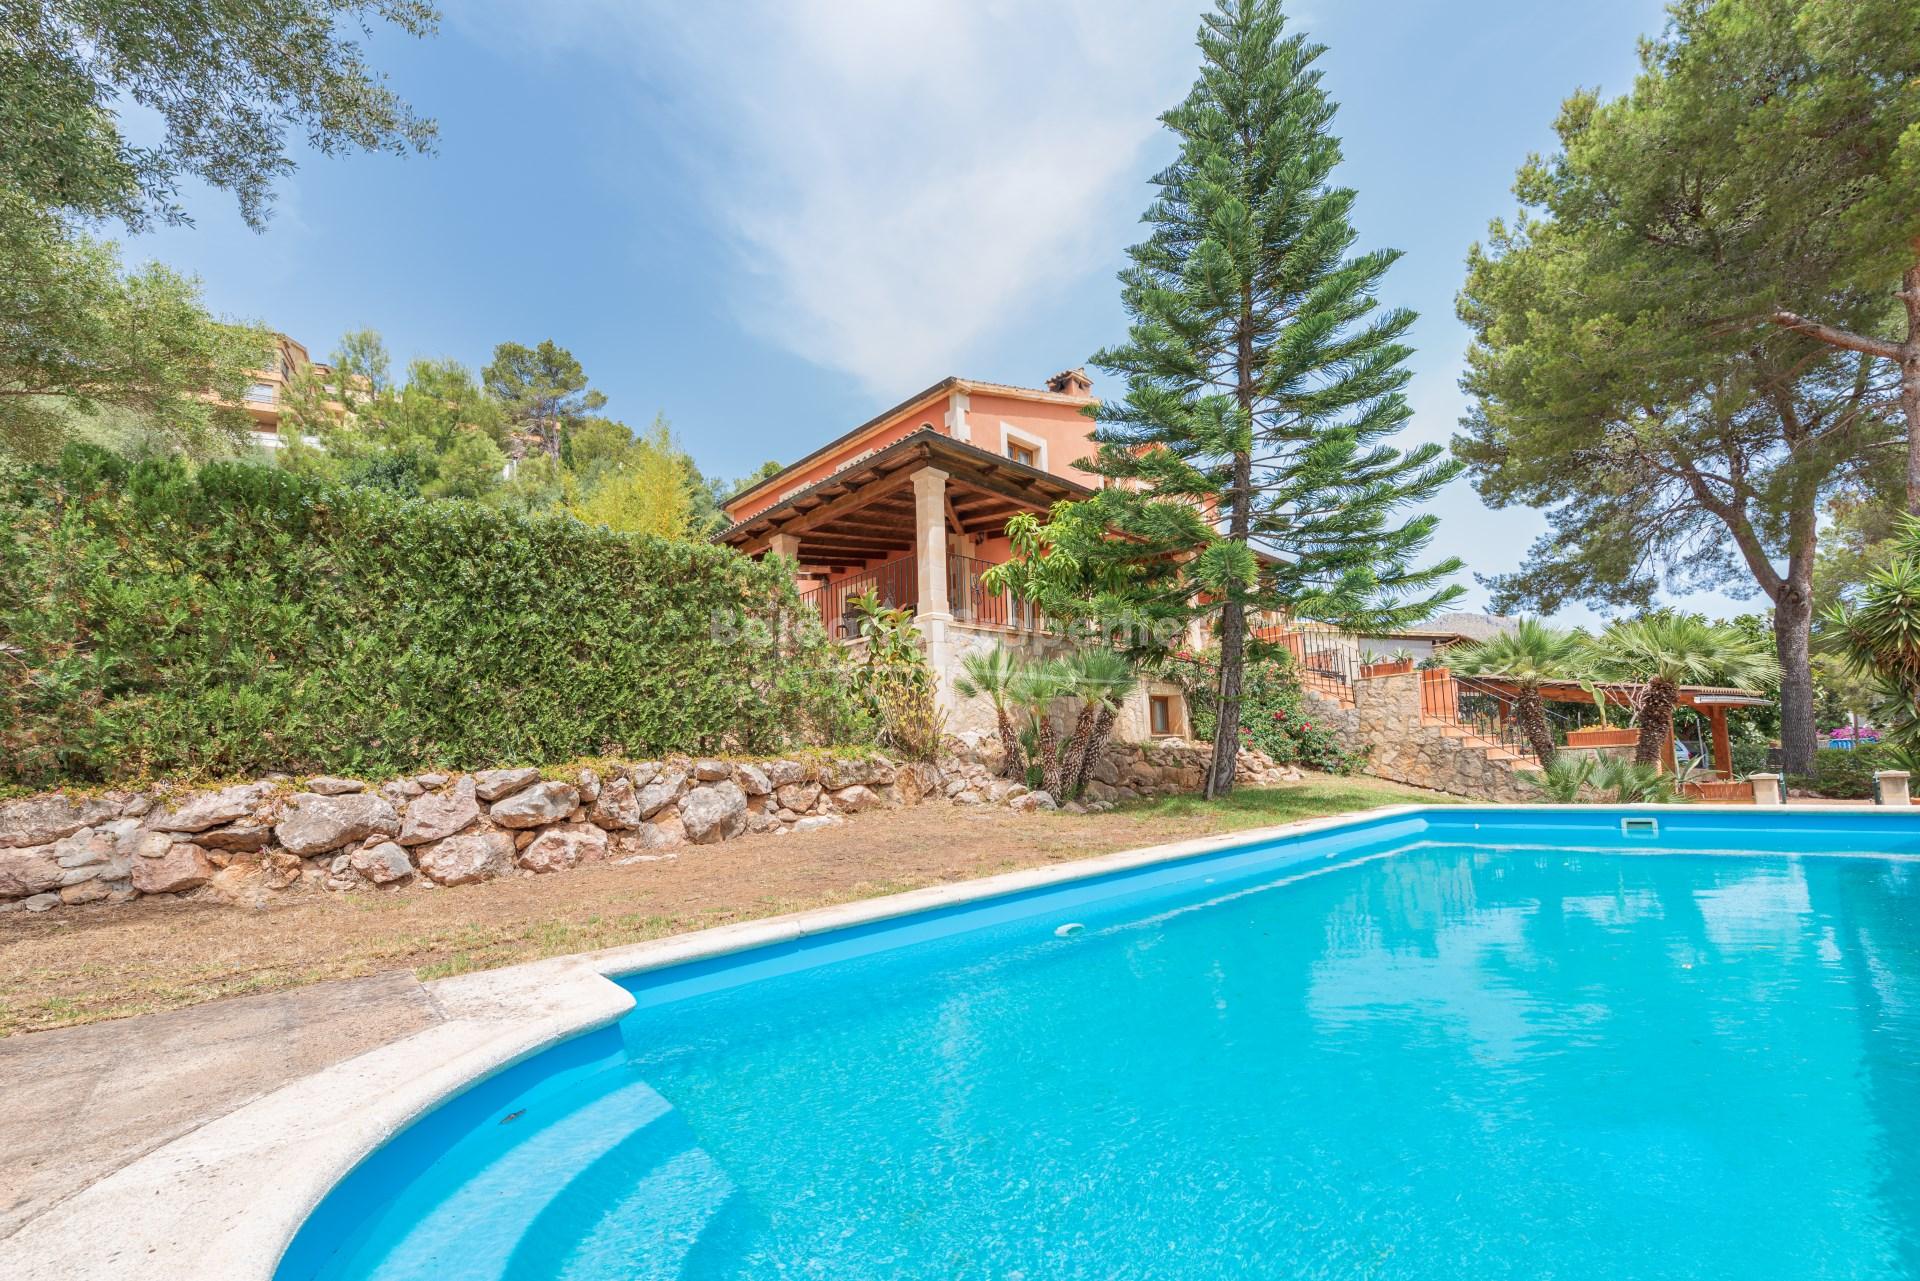 Outstanding villa with holiday rental license for sale in Puerto Pollensa, Mallorca